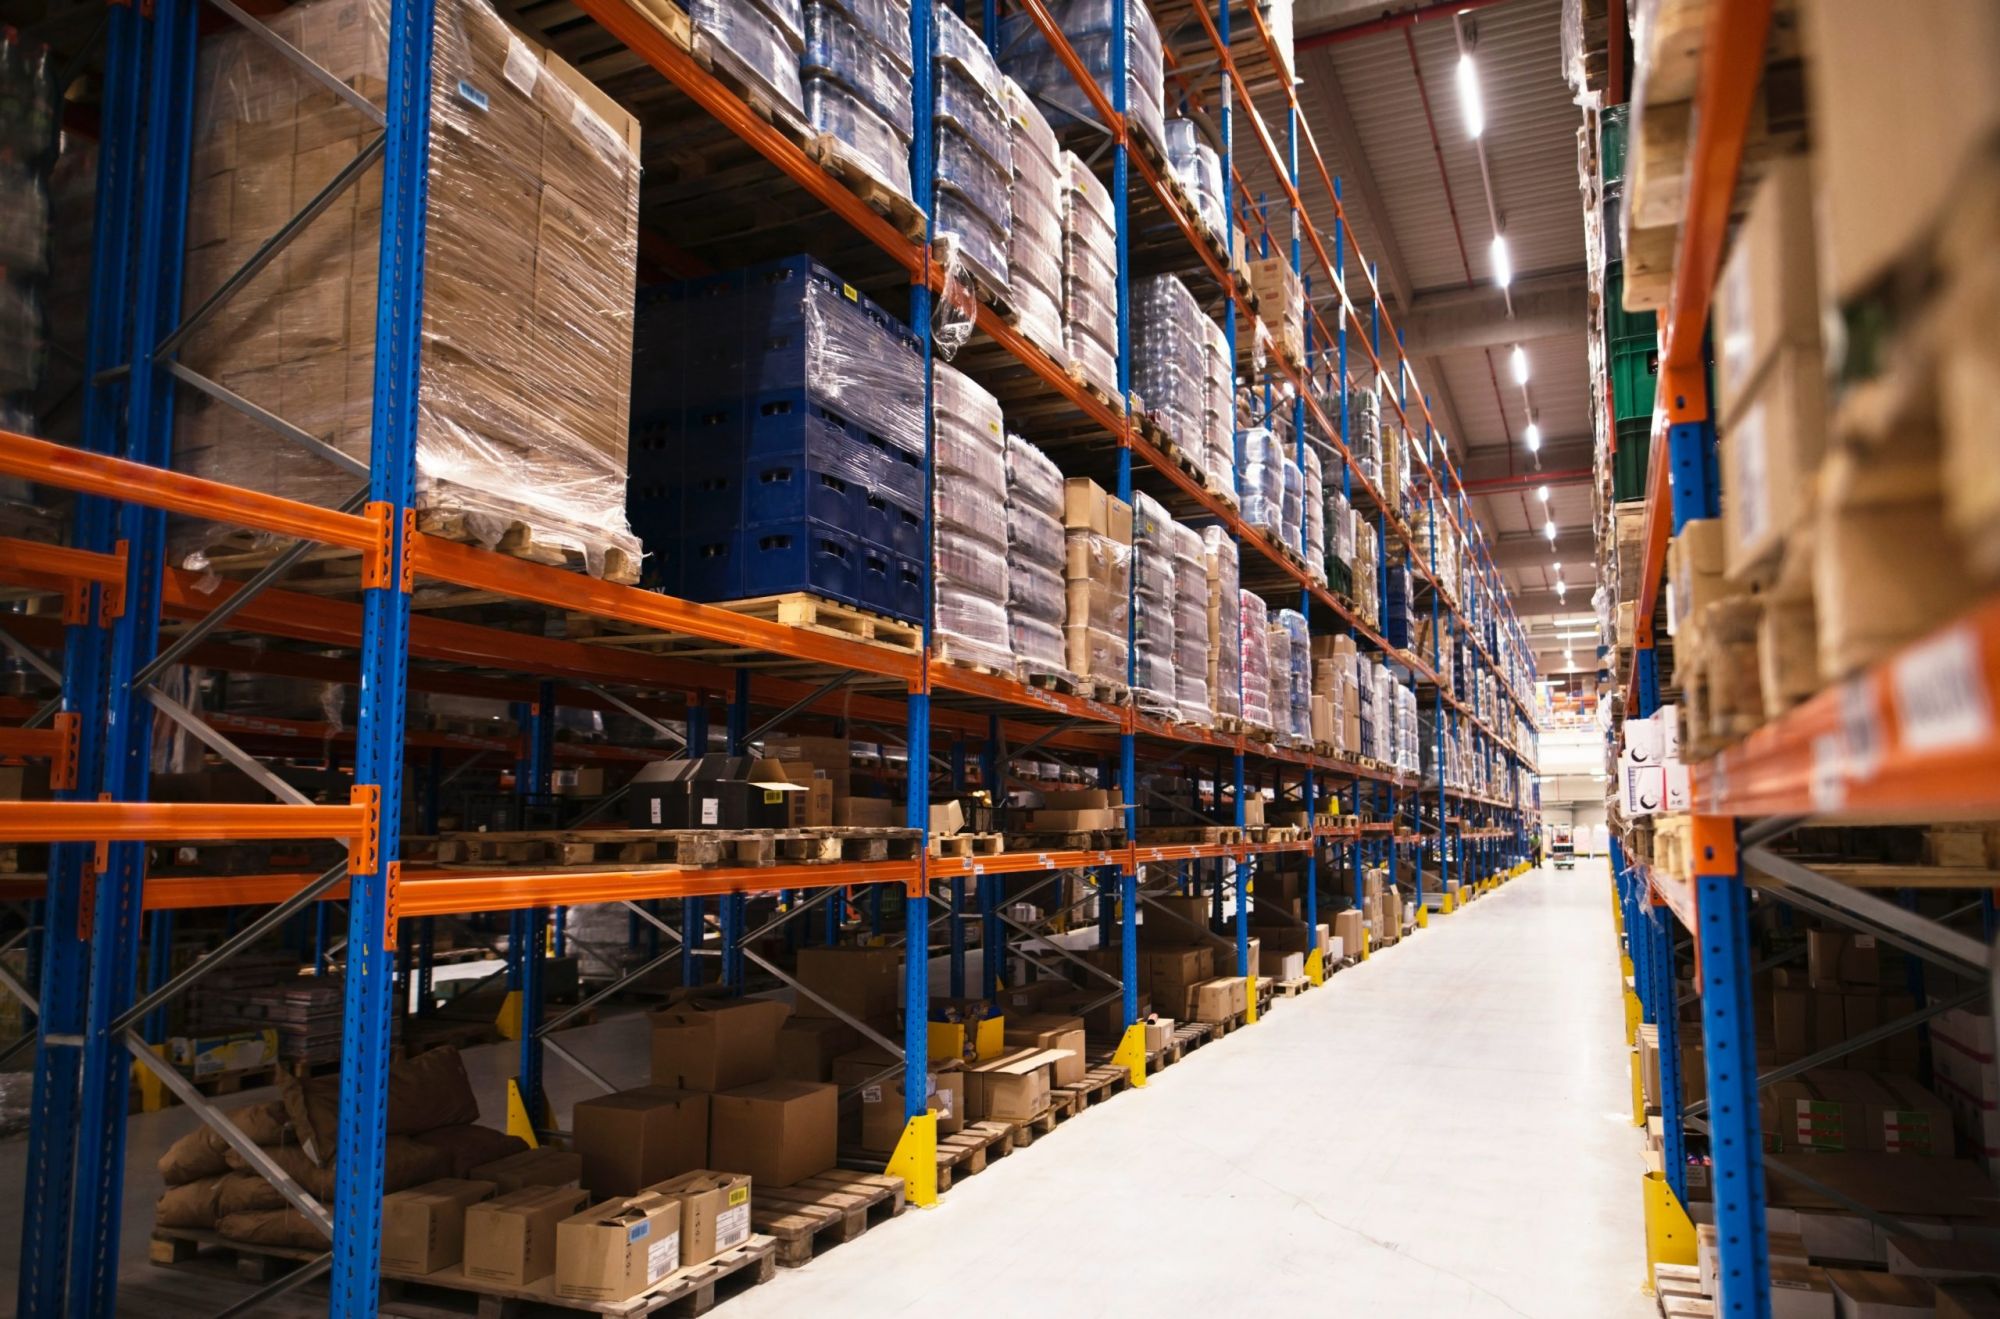 SPECIALIZED WAREHOUSE SERVICE FOR E-COMMERCE GOODS